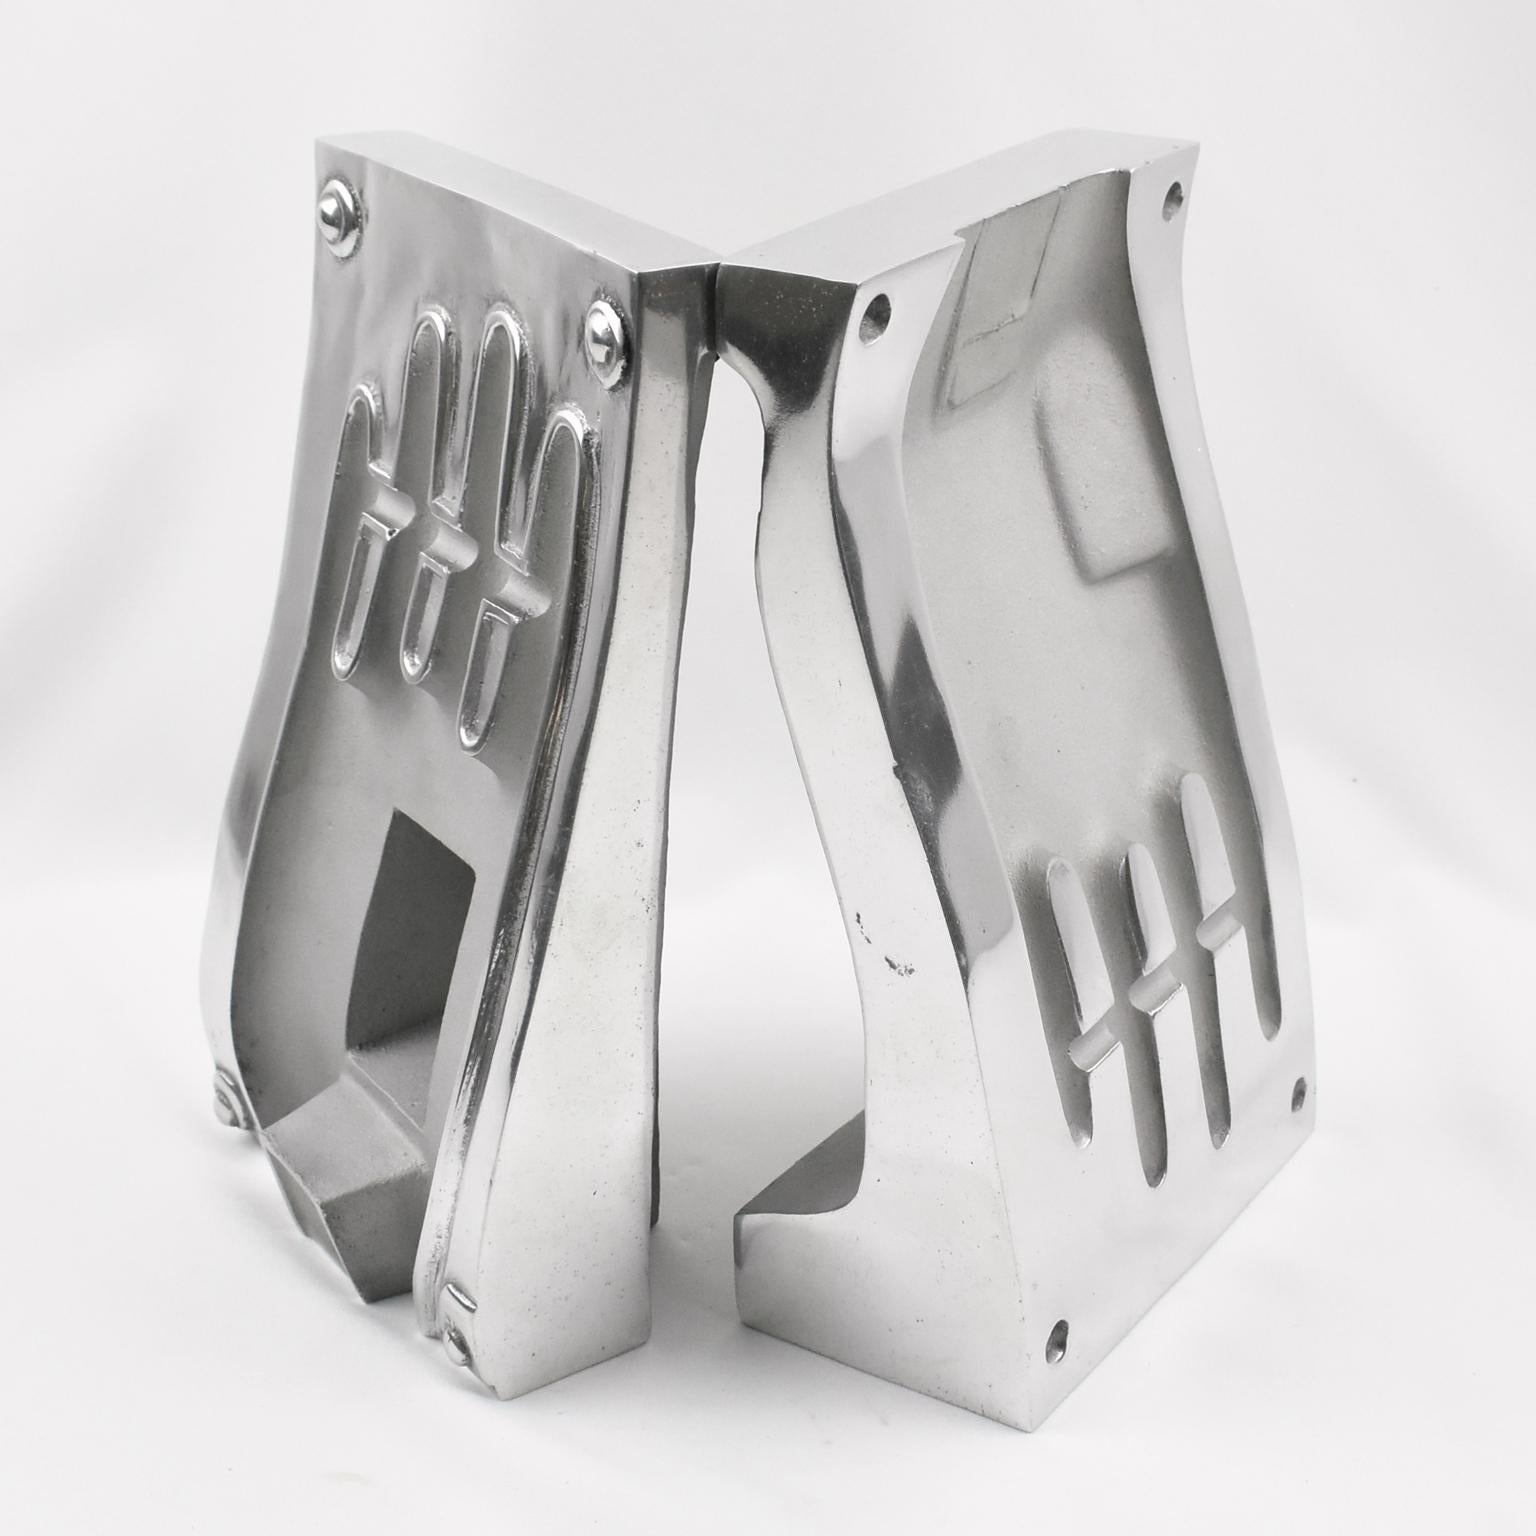 Stainless Steel Industrial Hand Glove Mold Sculpture Bookends, a pair For Sale 2